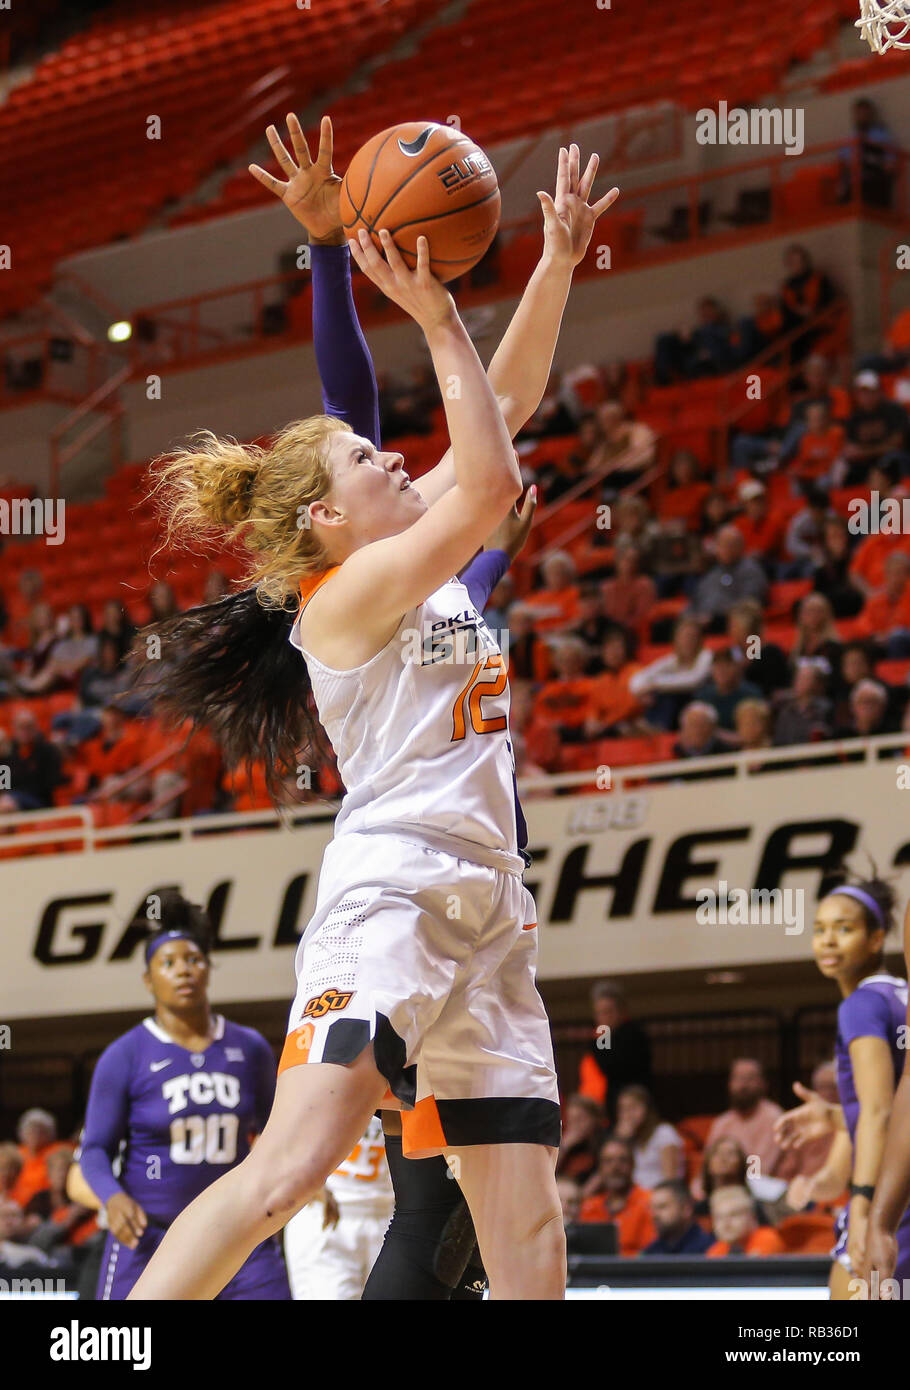 Stillwater, OK, USA. 6th Jan, 2019. Oklahoma State Forward Vivian Gray (12) attempts a shot during a basketball game between the TCU Horned Frogs and Oklahoma State Cowgirls at Gallagher-Iba Arena in Stillwater, OK. Gray Siegel/CSM/Alamy Live News Stock Photo